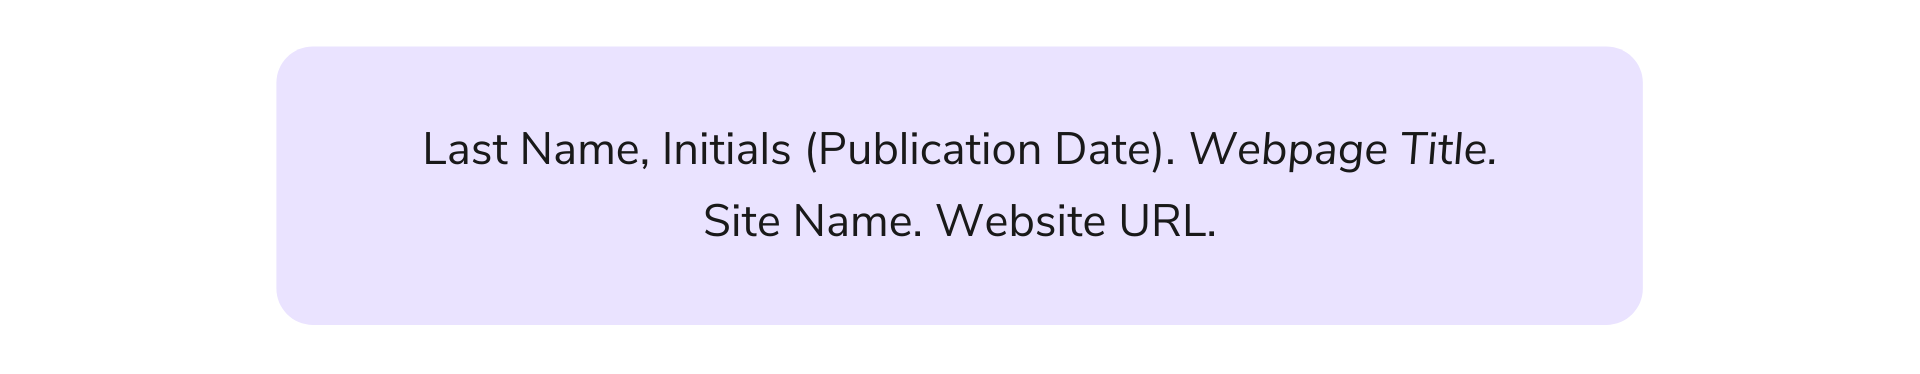 How to cite a website in APA